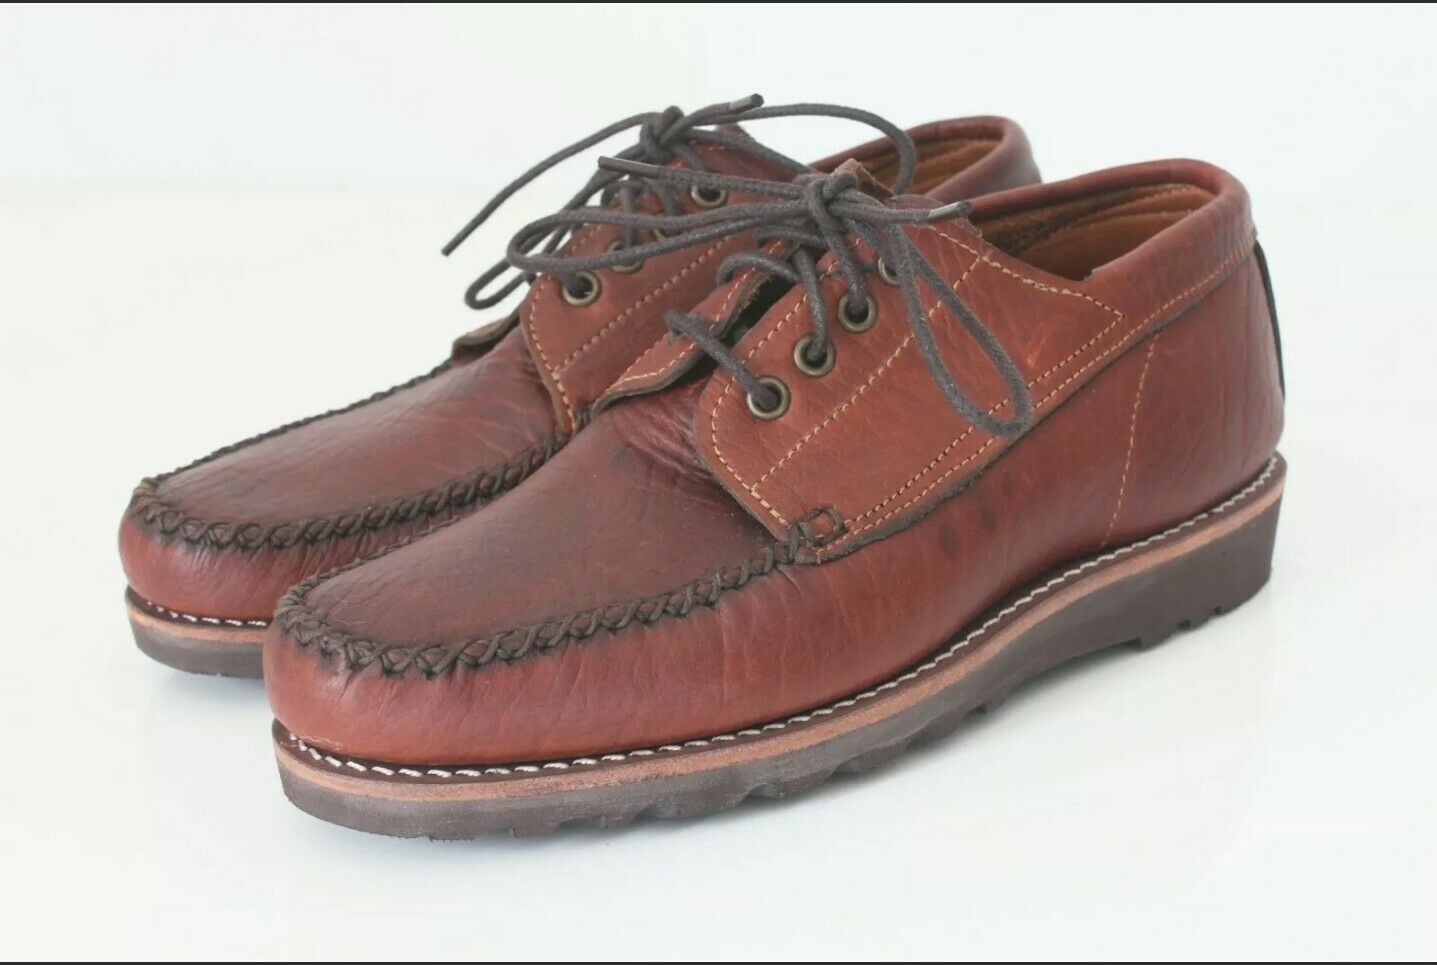 GOKEY x Orvis NWOB Camp Shoes Moc Toe Wedge Sole Bison Leather USA Mens 12 D